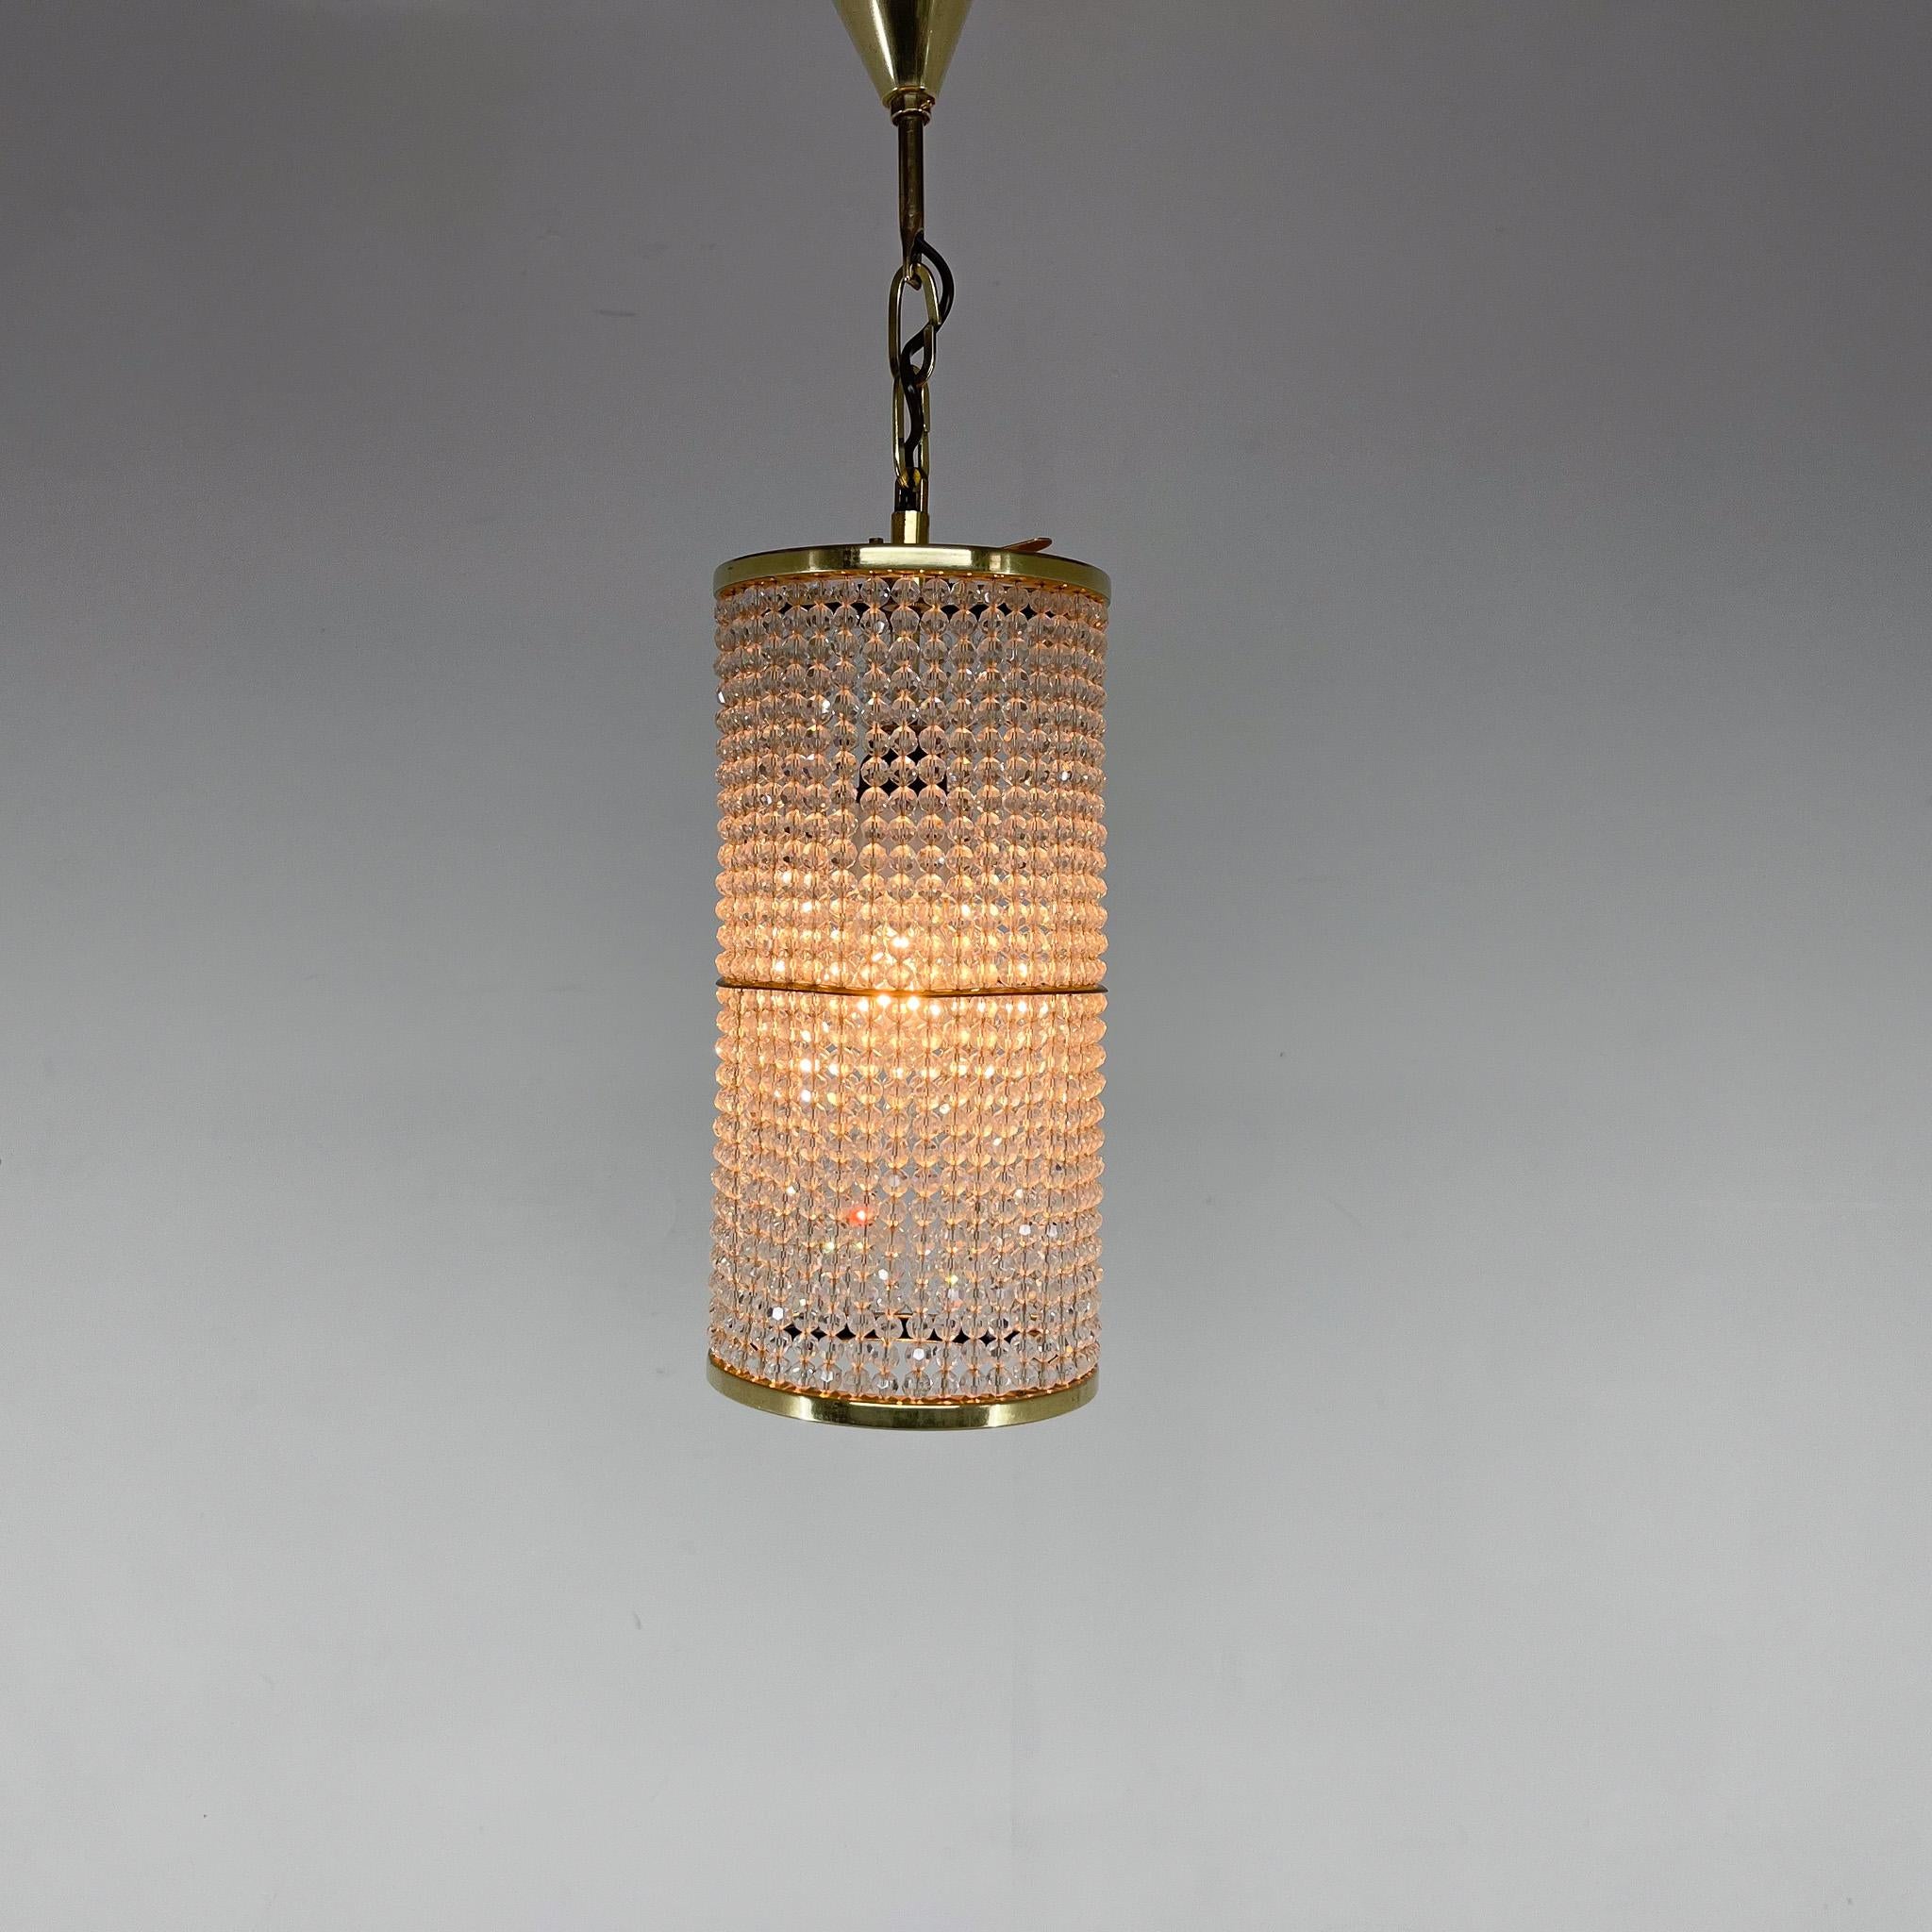 An unusual chandelier from the 1970s from the famous Presiosa glassworks, whose history dates back to the 16th century. Combination of clear glass and brass crystals.